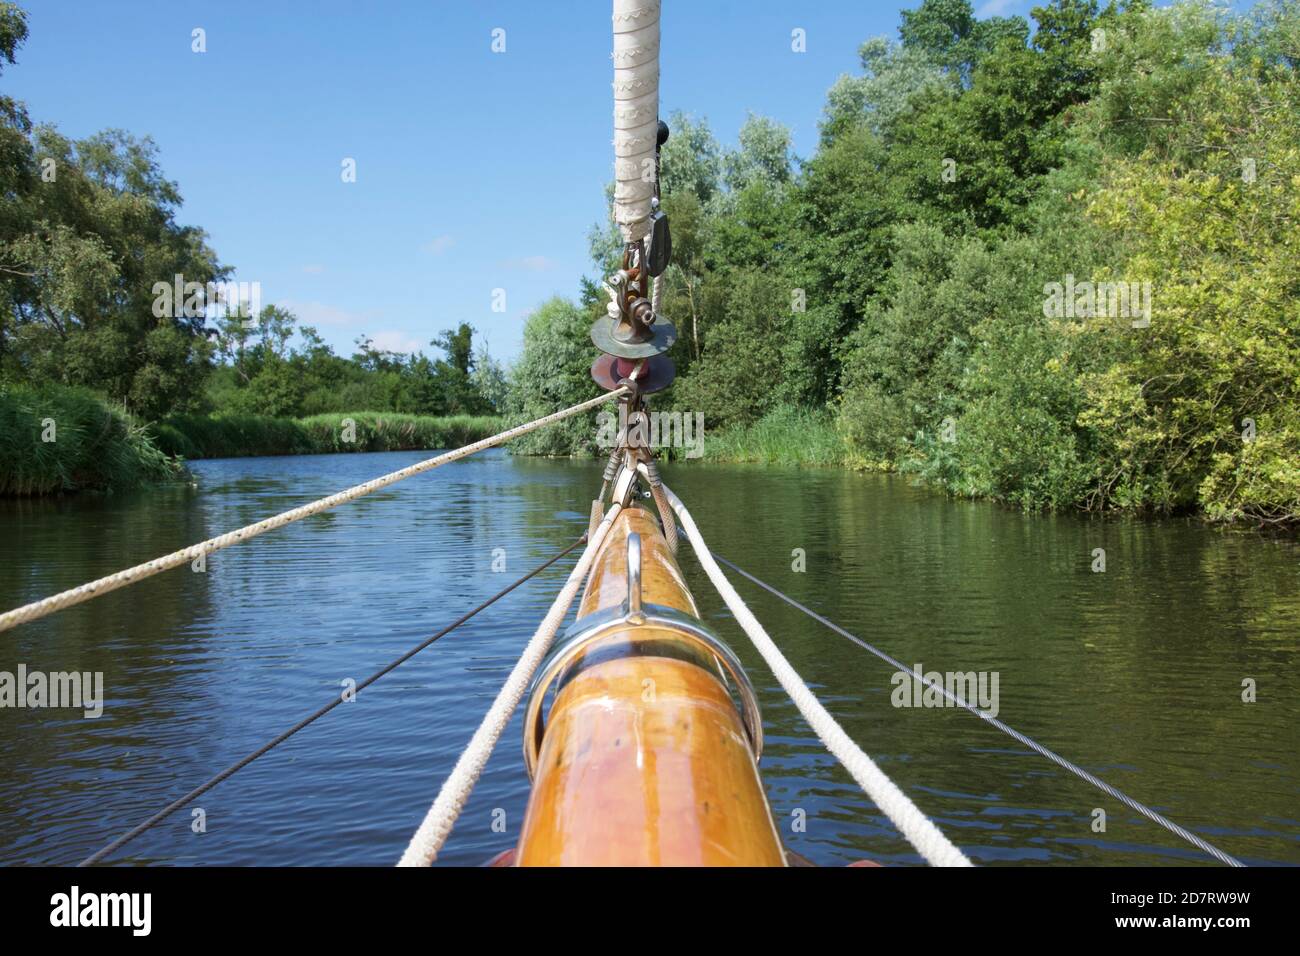 The wooden bowsprit and furled jib of a sailing yacht, moving up the centre of a sunny river between tree-lined banks Stock Photo